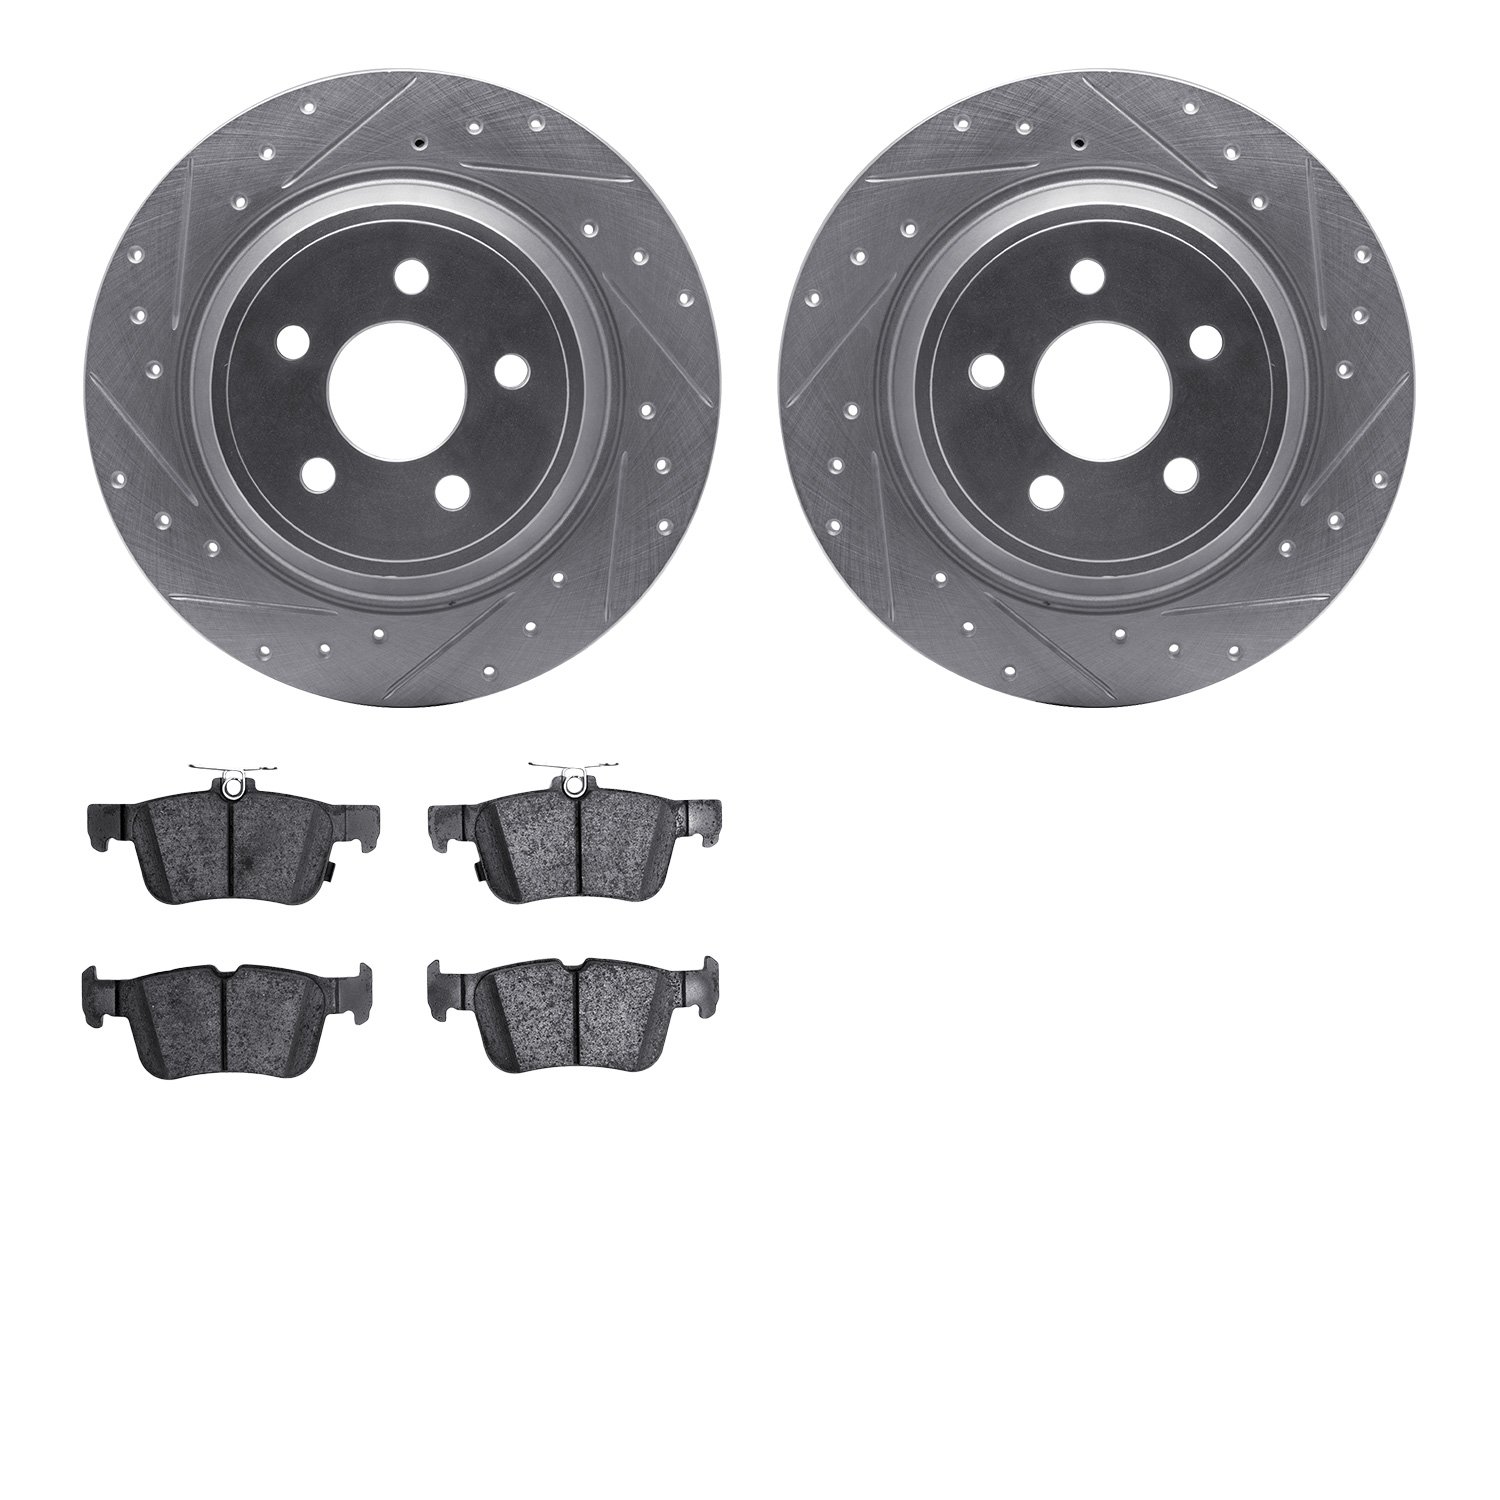 7502-55001 Drilled/Slotted Brake Rotors w/5000 Advanced Brake Pads Kit [Silver], Fits Select Ford/Lincoln/Mercury/Mazda, Positio